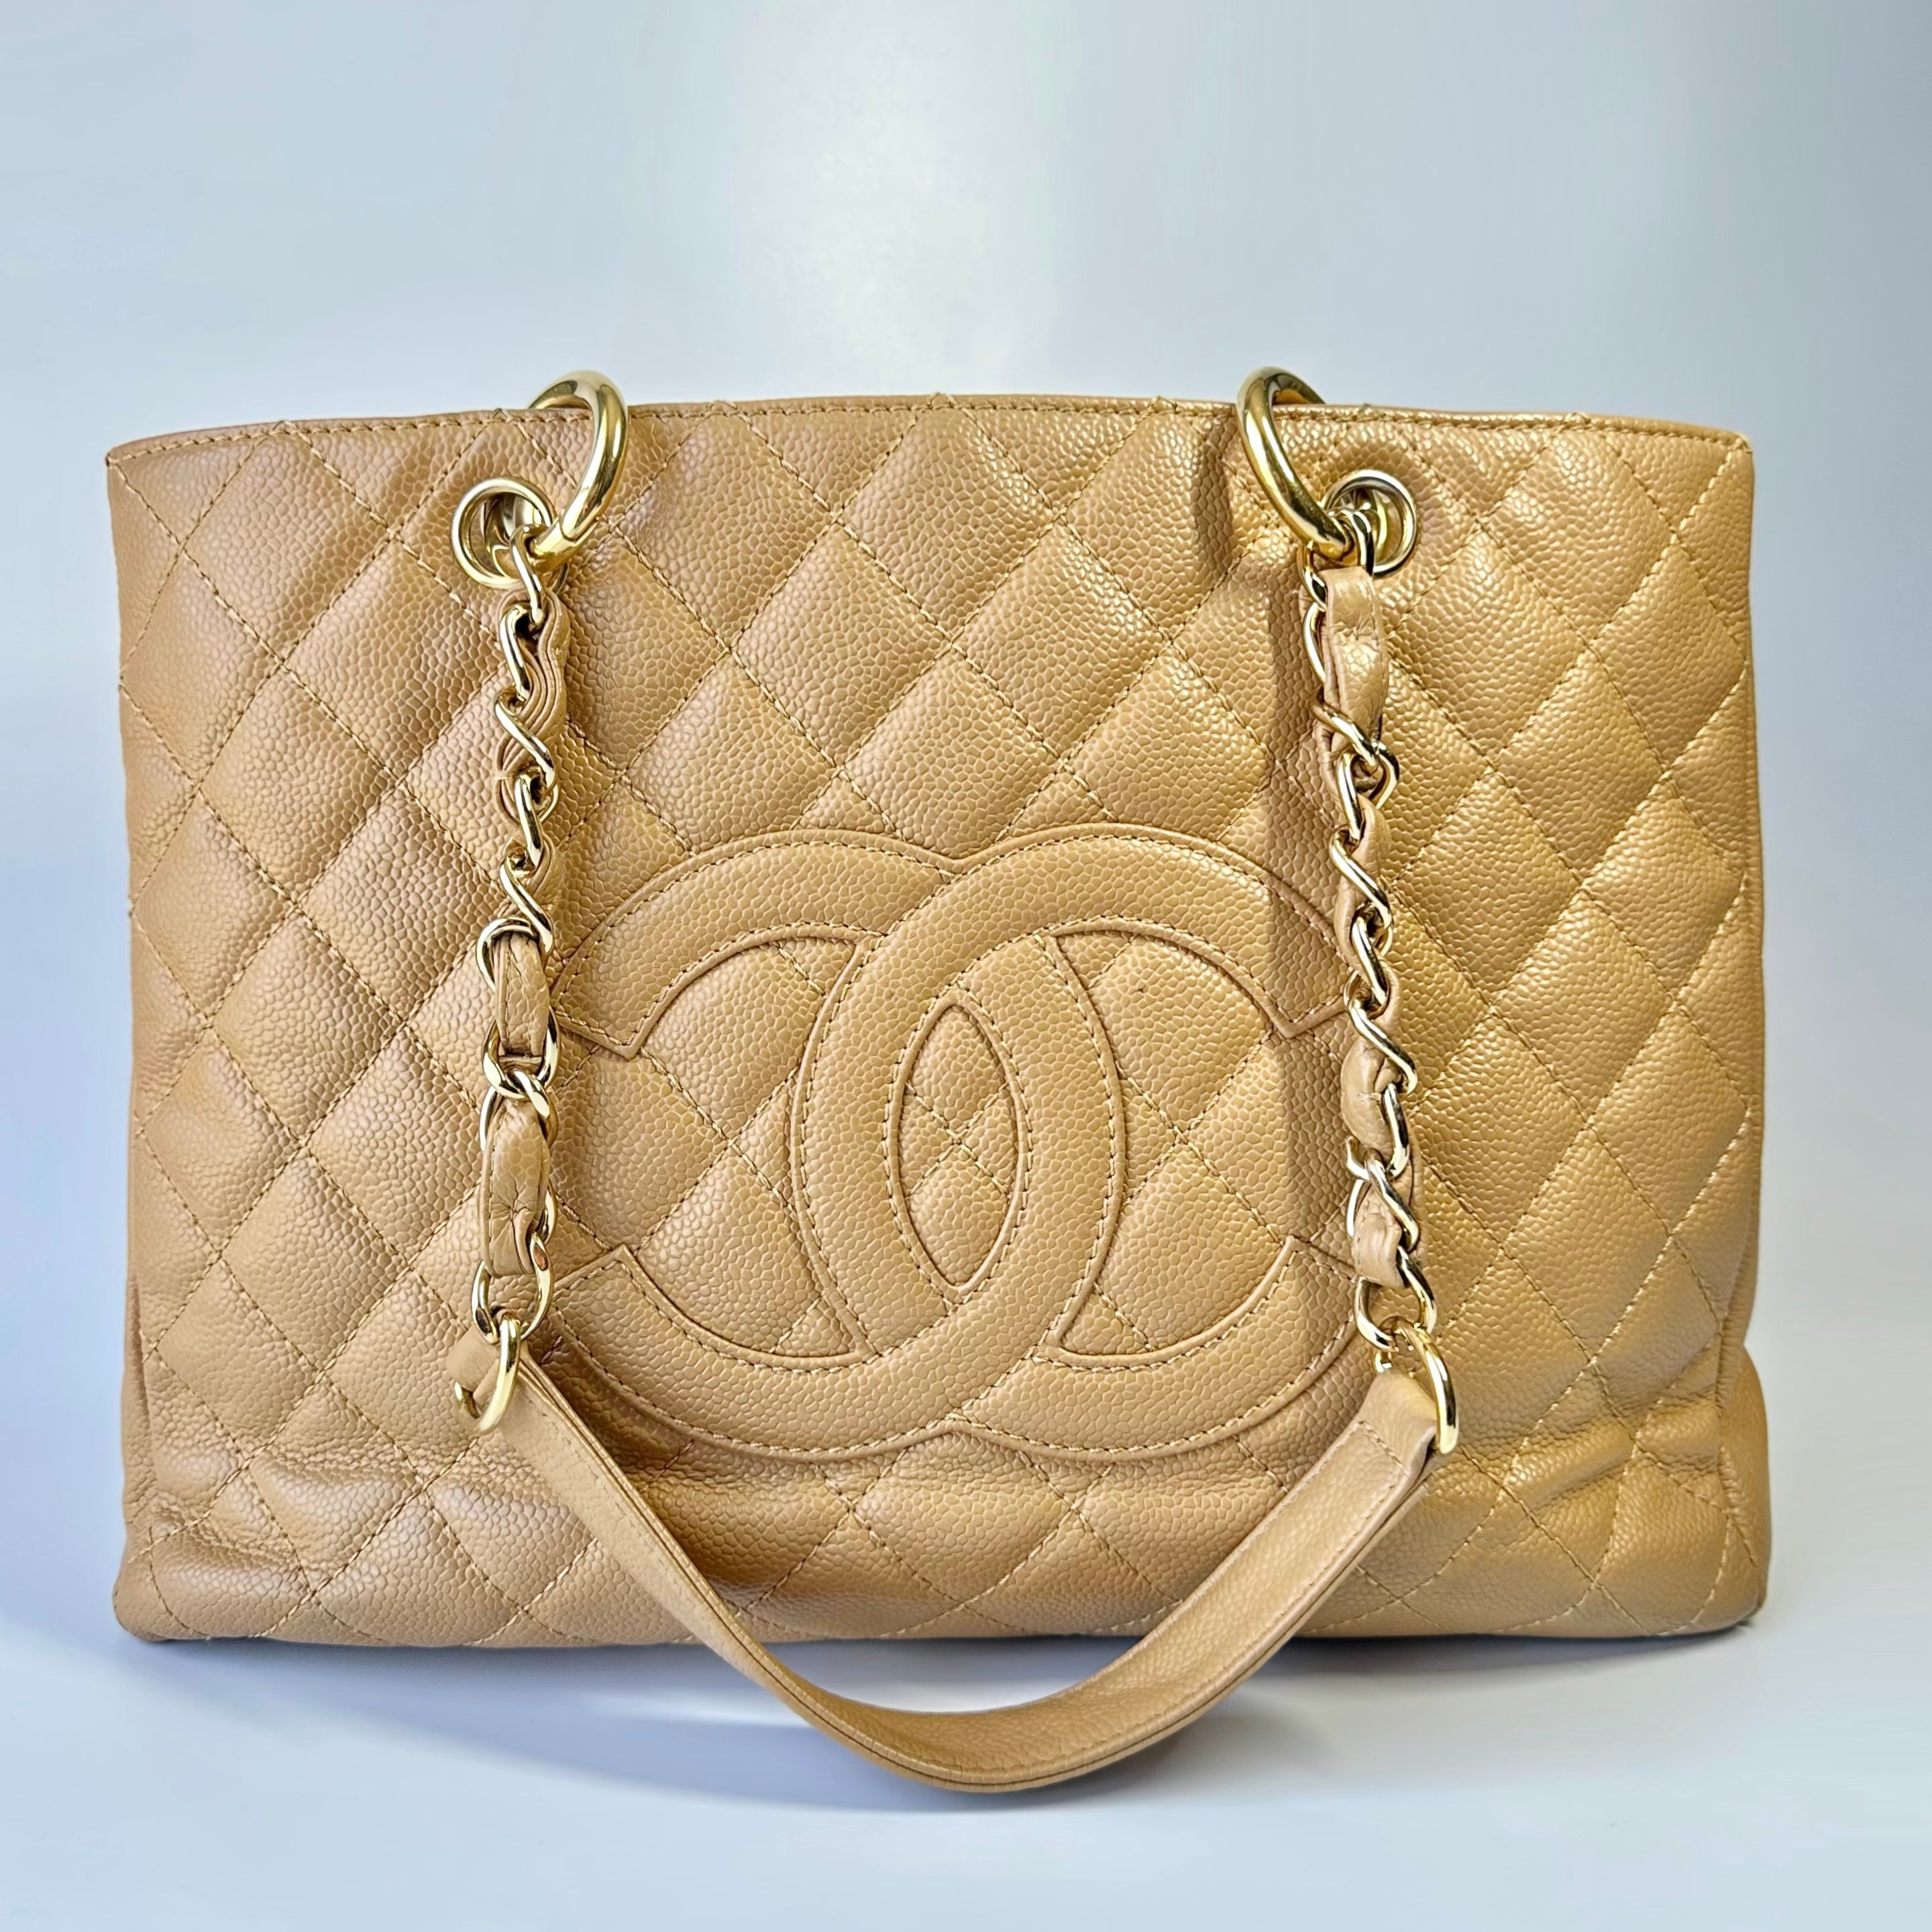 CHANEL, Bags, Sold Chanel Caviar Grand Shopping Tote Gst Beige